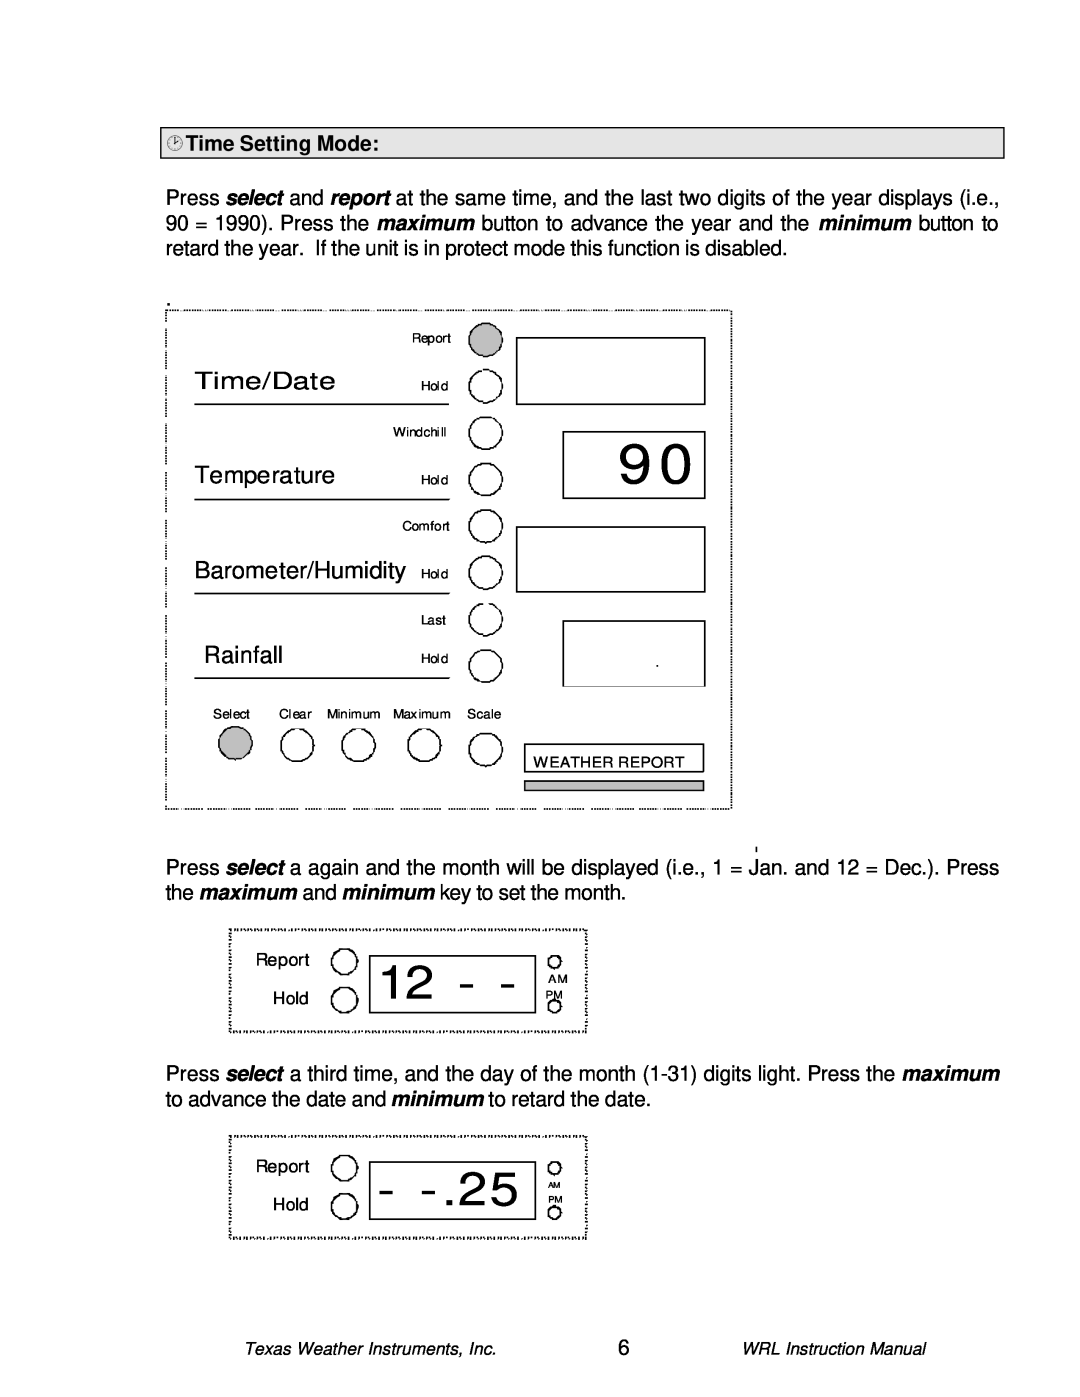 Texas Instruments WRL-10 instruction manual Hold, ¸Time Setting Mode, Time/Date Temperature, Barometer/Humidity Rainfall 